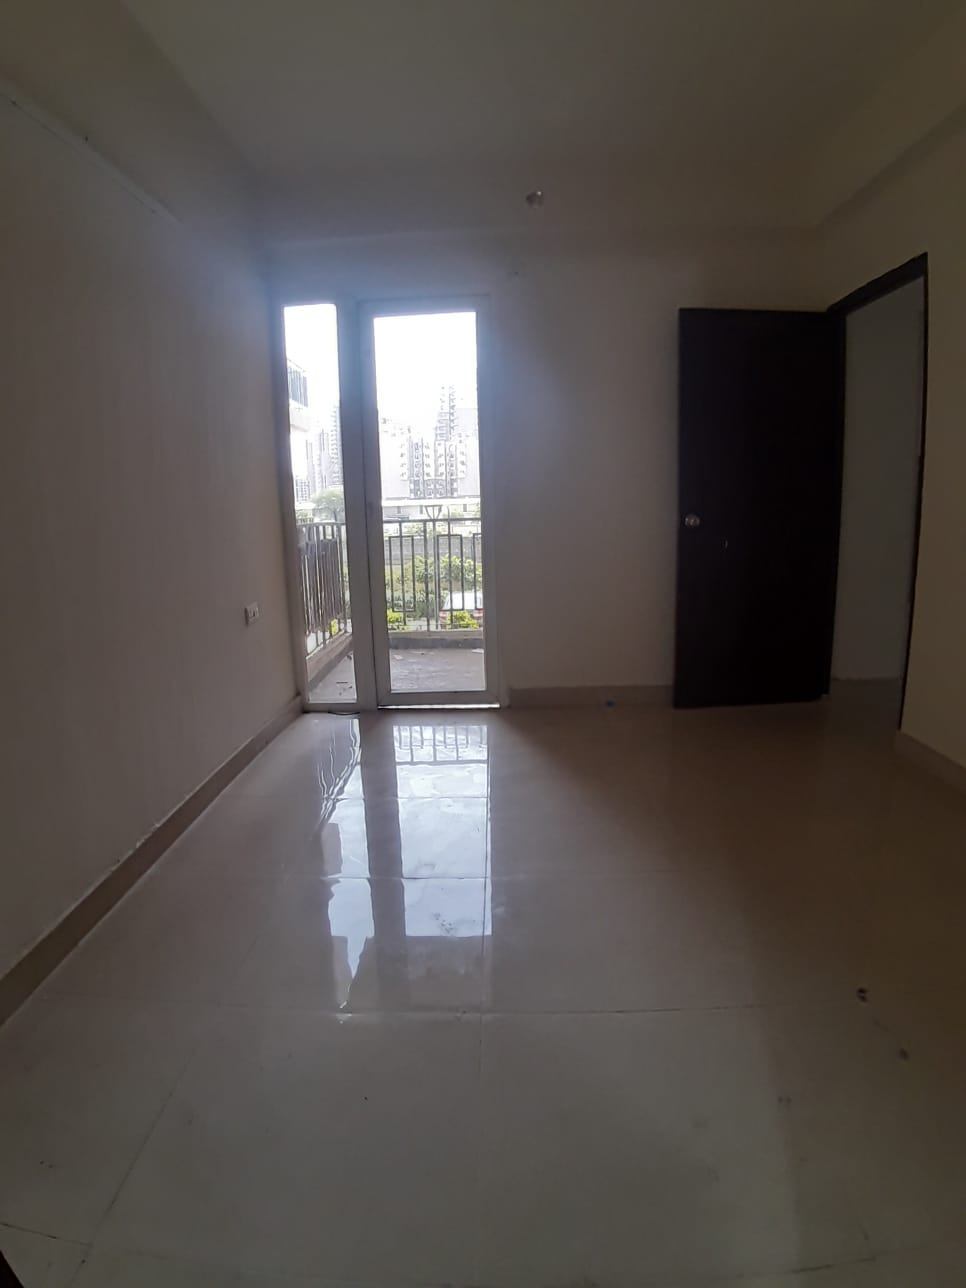 2 Bed/ 2 Bath Rent Apartment/ Flat; 514 sq. ft. carpet area, UnFurnished for rent @Sector 95A Gurgaon 